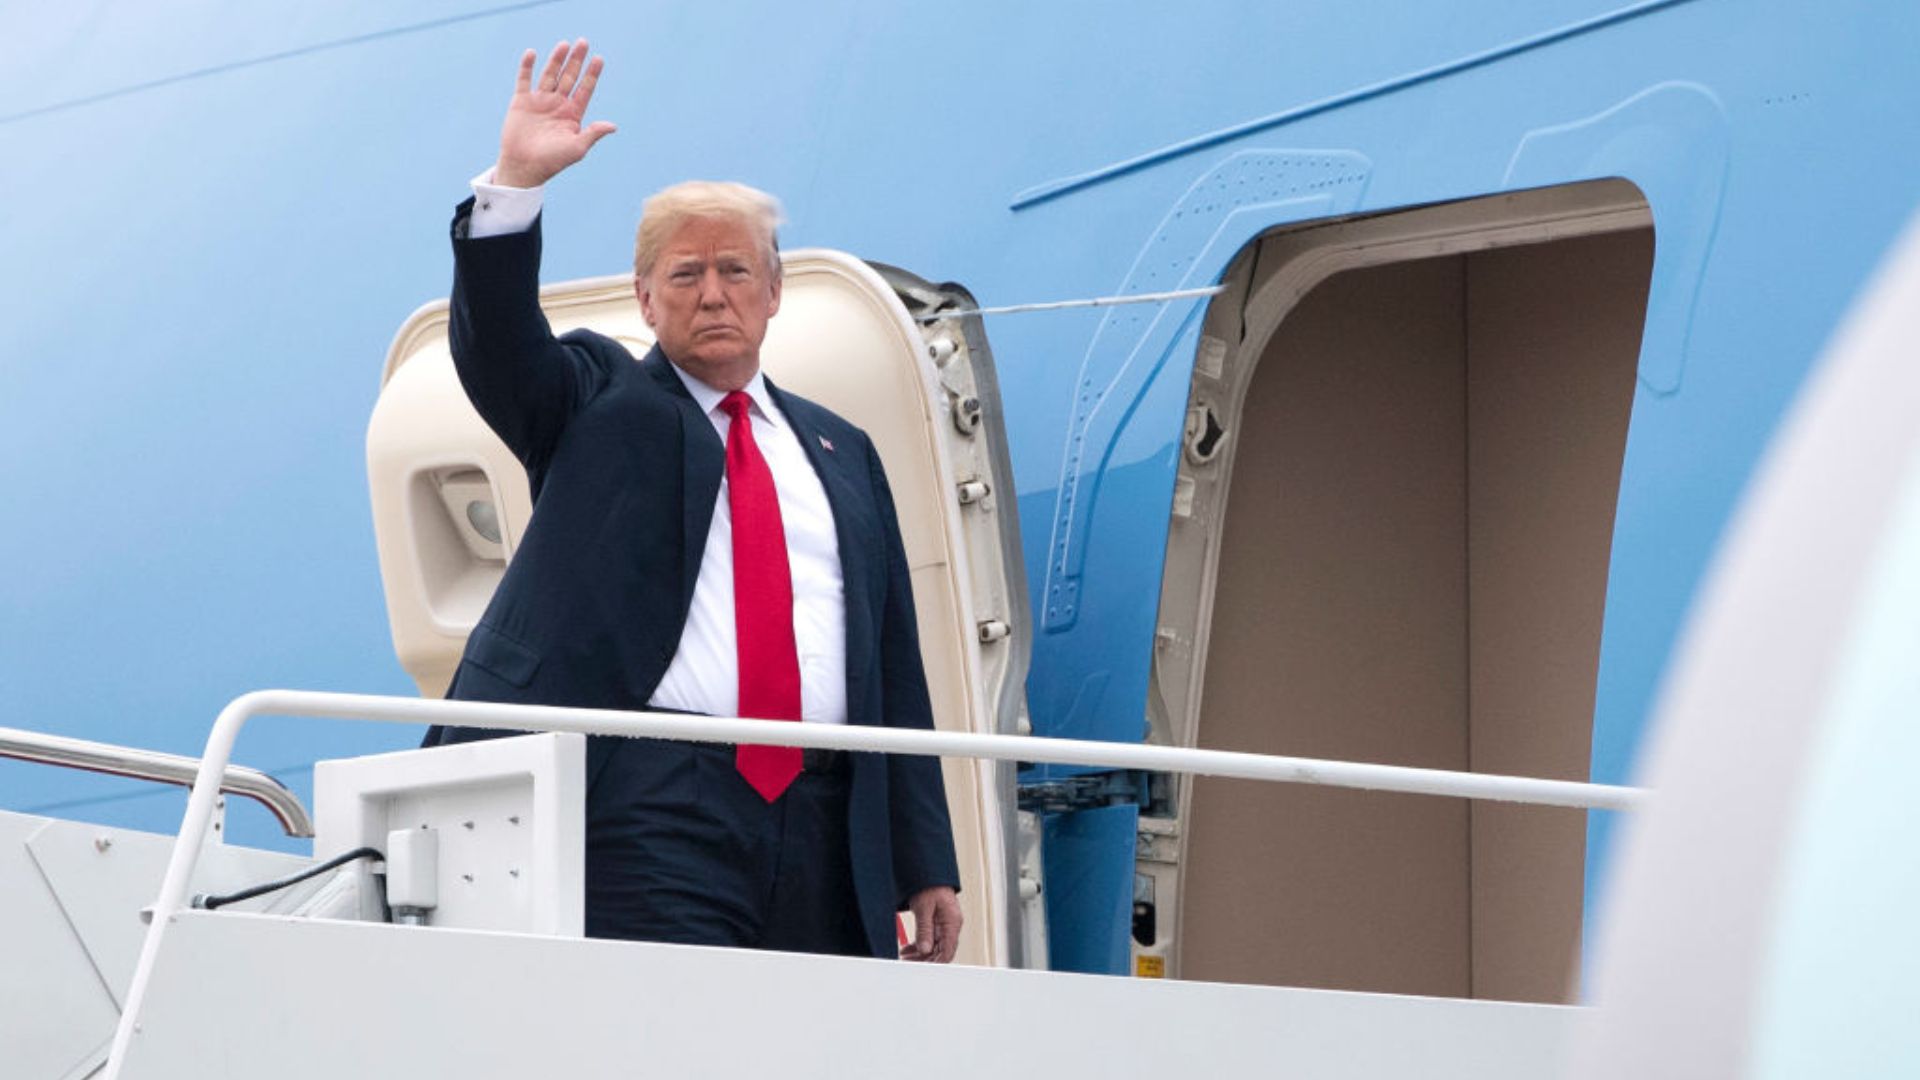 Donald Trump standing at the doorway of Air Force One, raising his right hand in a wave